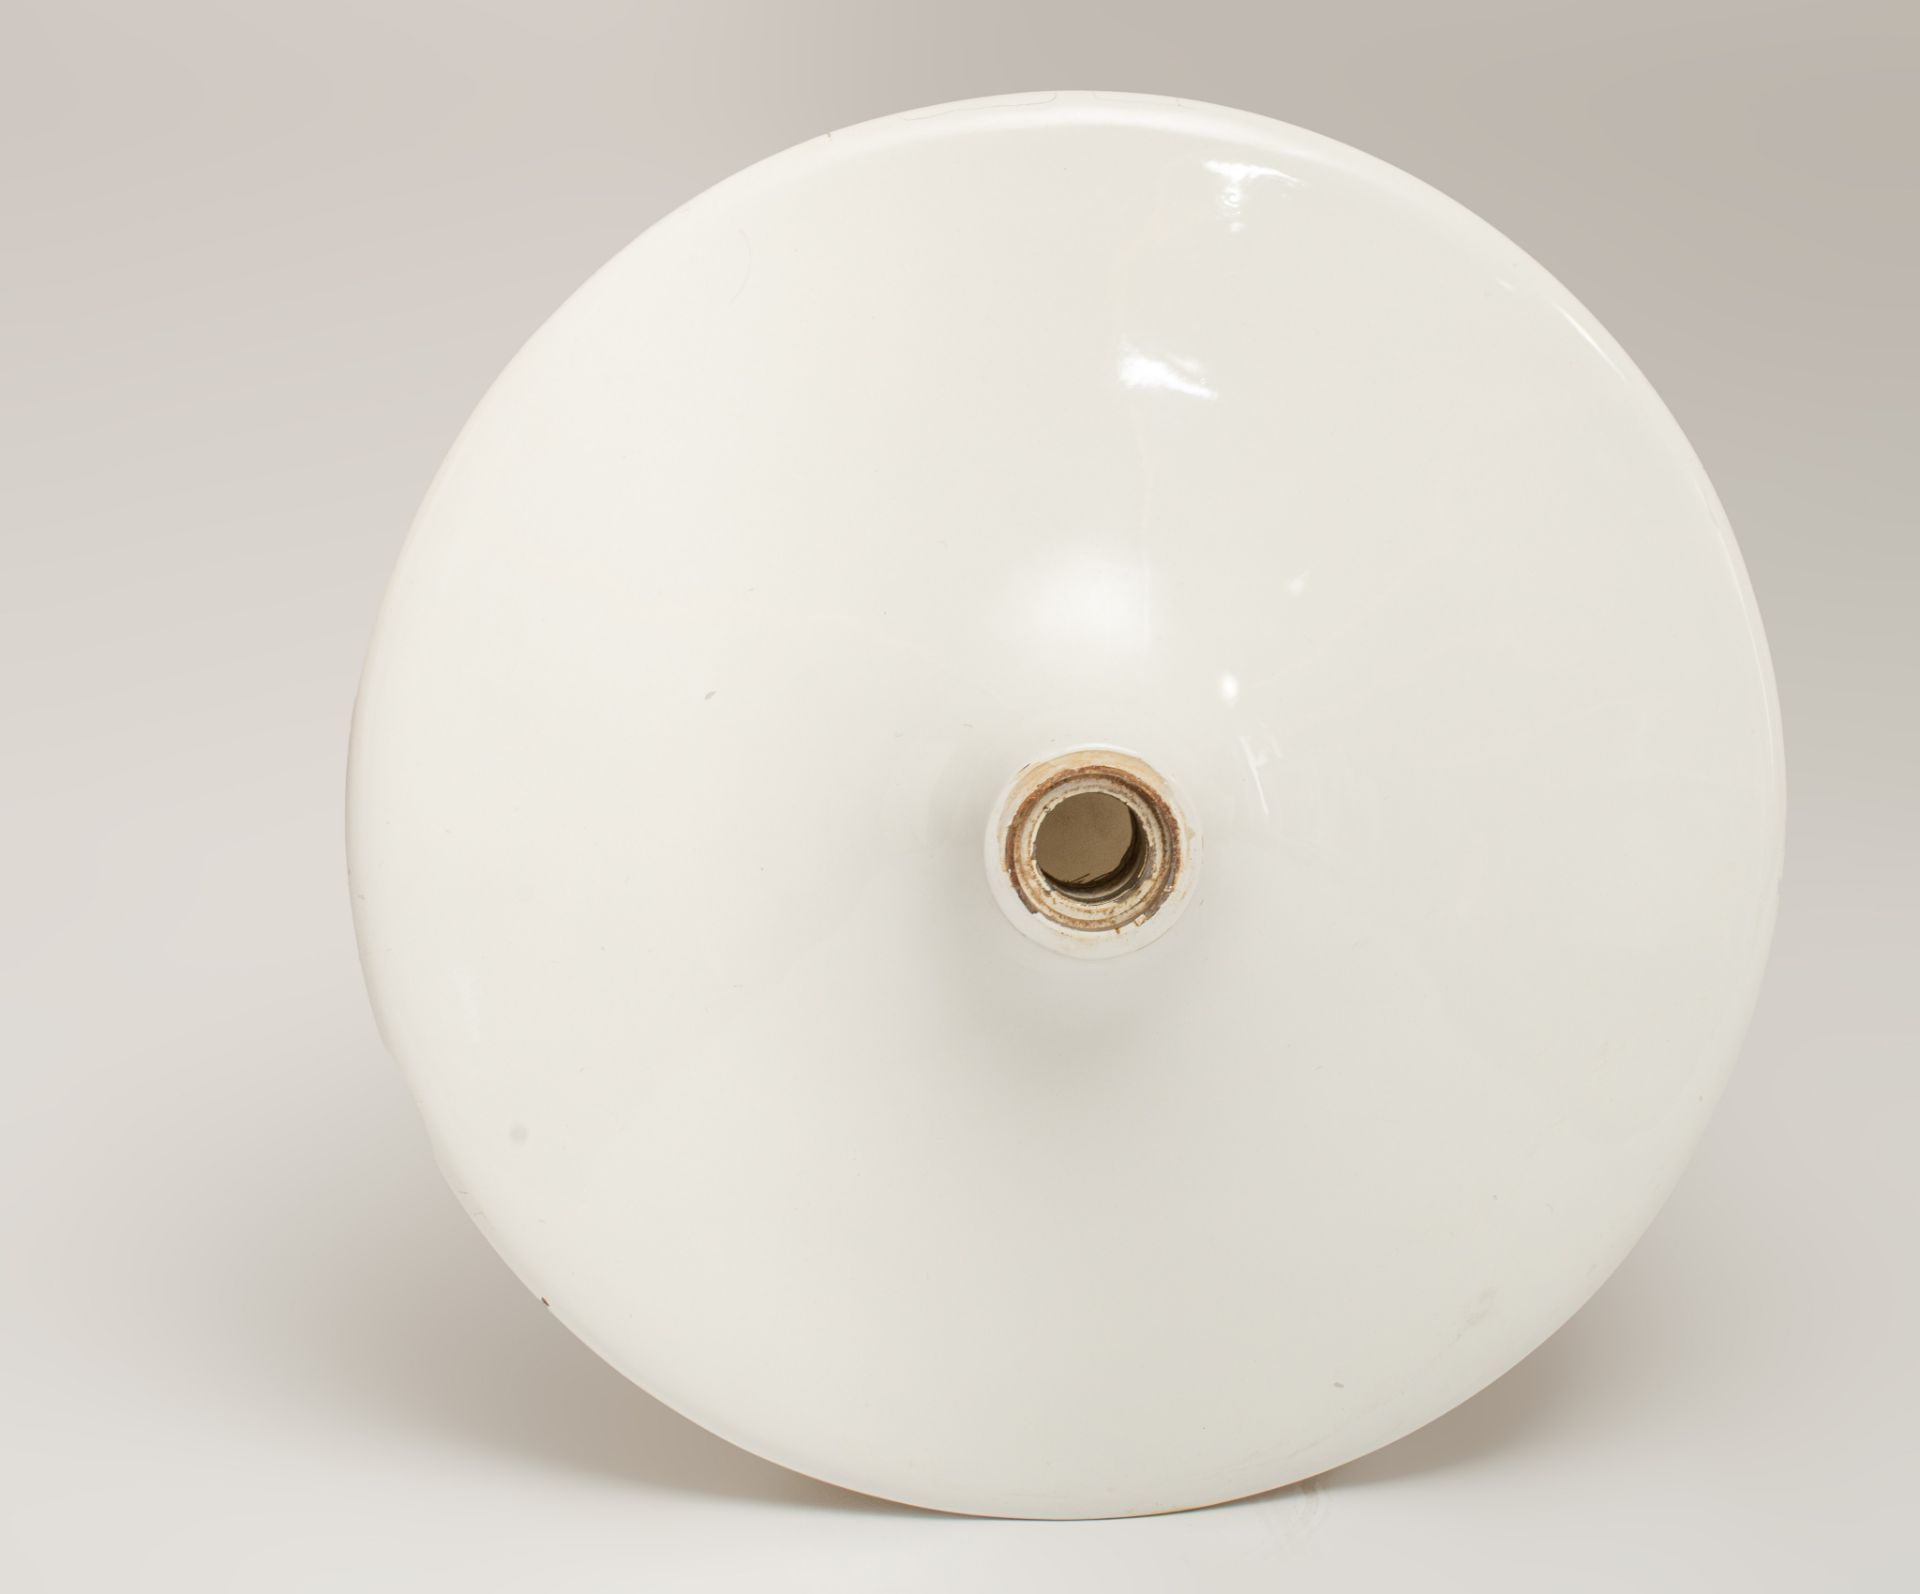 A Globe or Ball Chair by Eero Aarnio, Finland, 1966, H 120 cm - Image 12 of 16